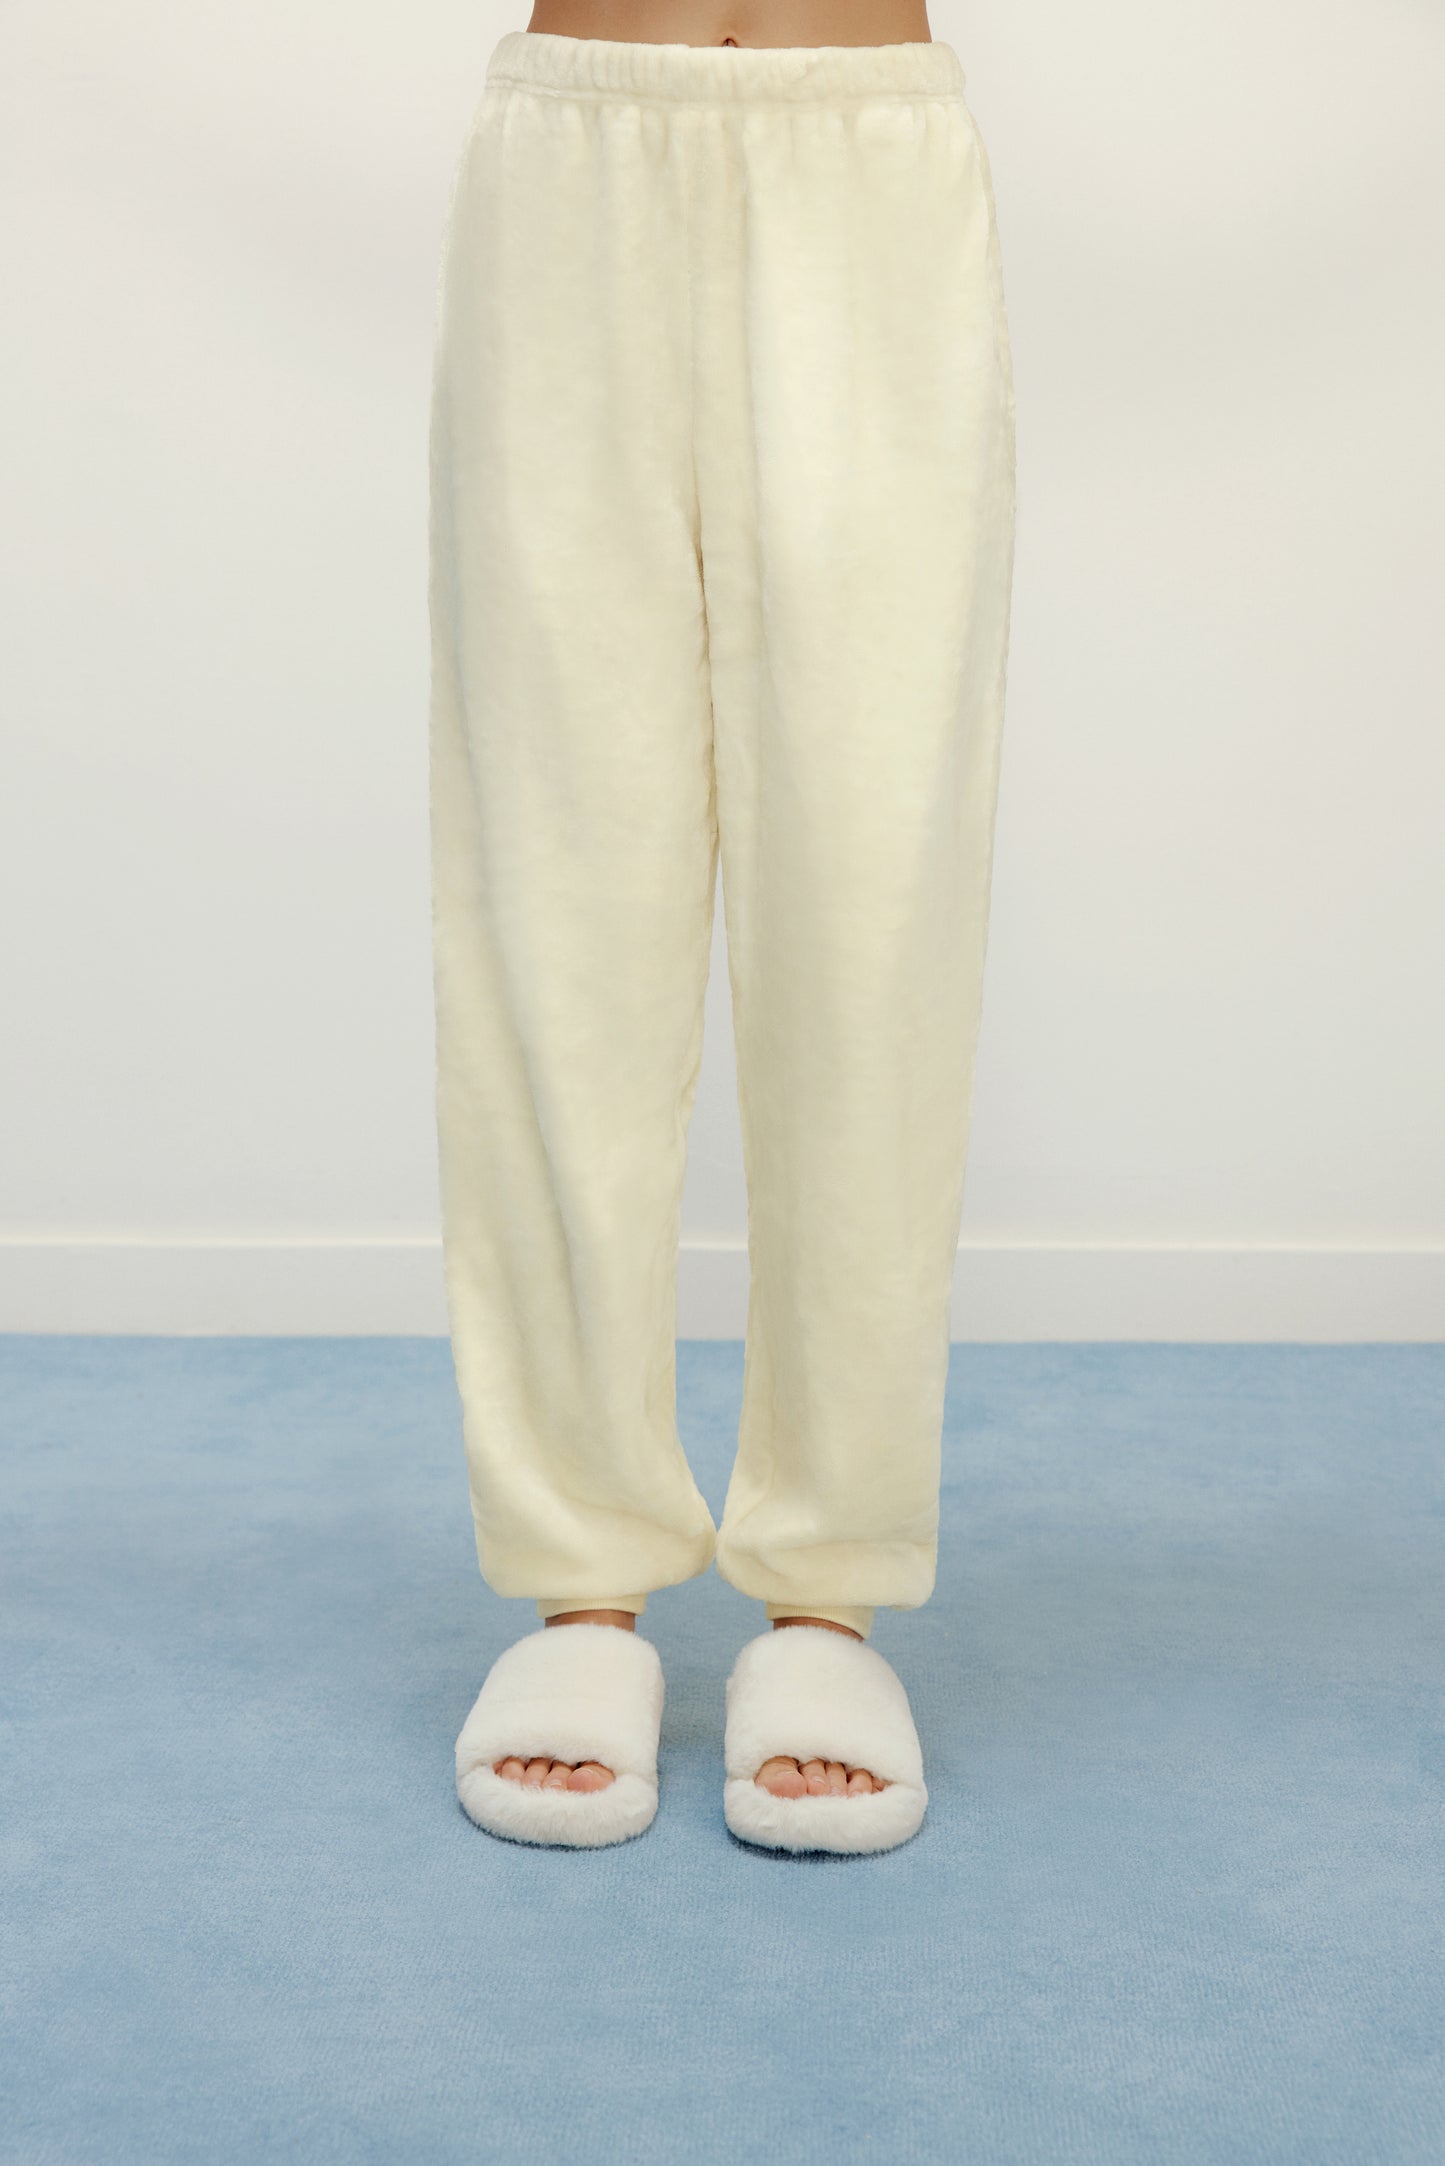 MarcoJudy Cosy Fuzzy Fleece Pajama Pants, The 50 Coziest Fall Products on  the Internet For Under $50